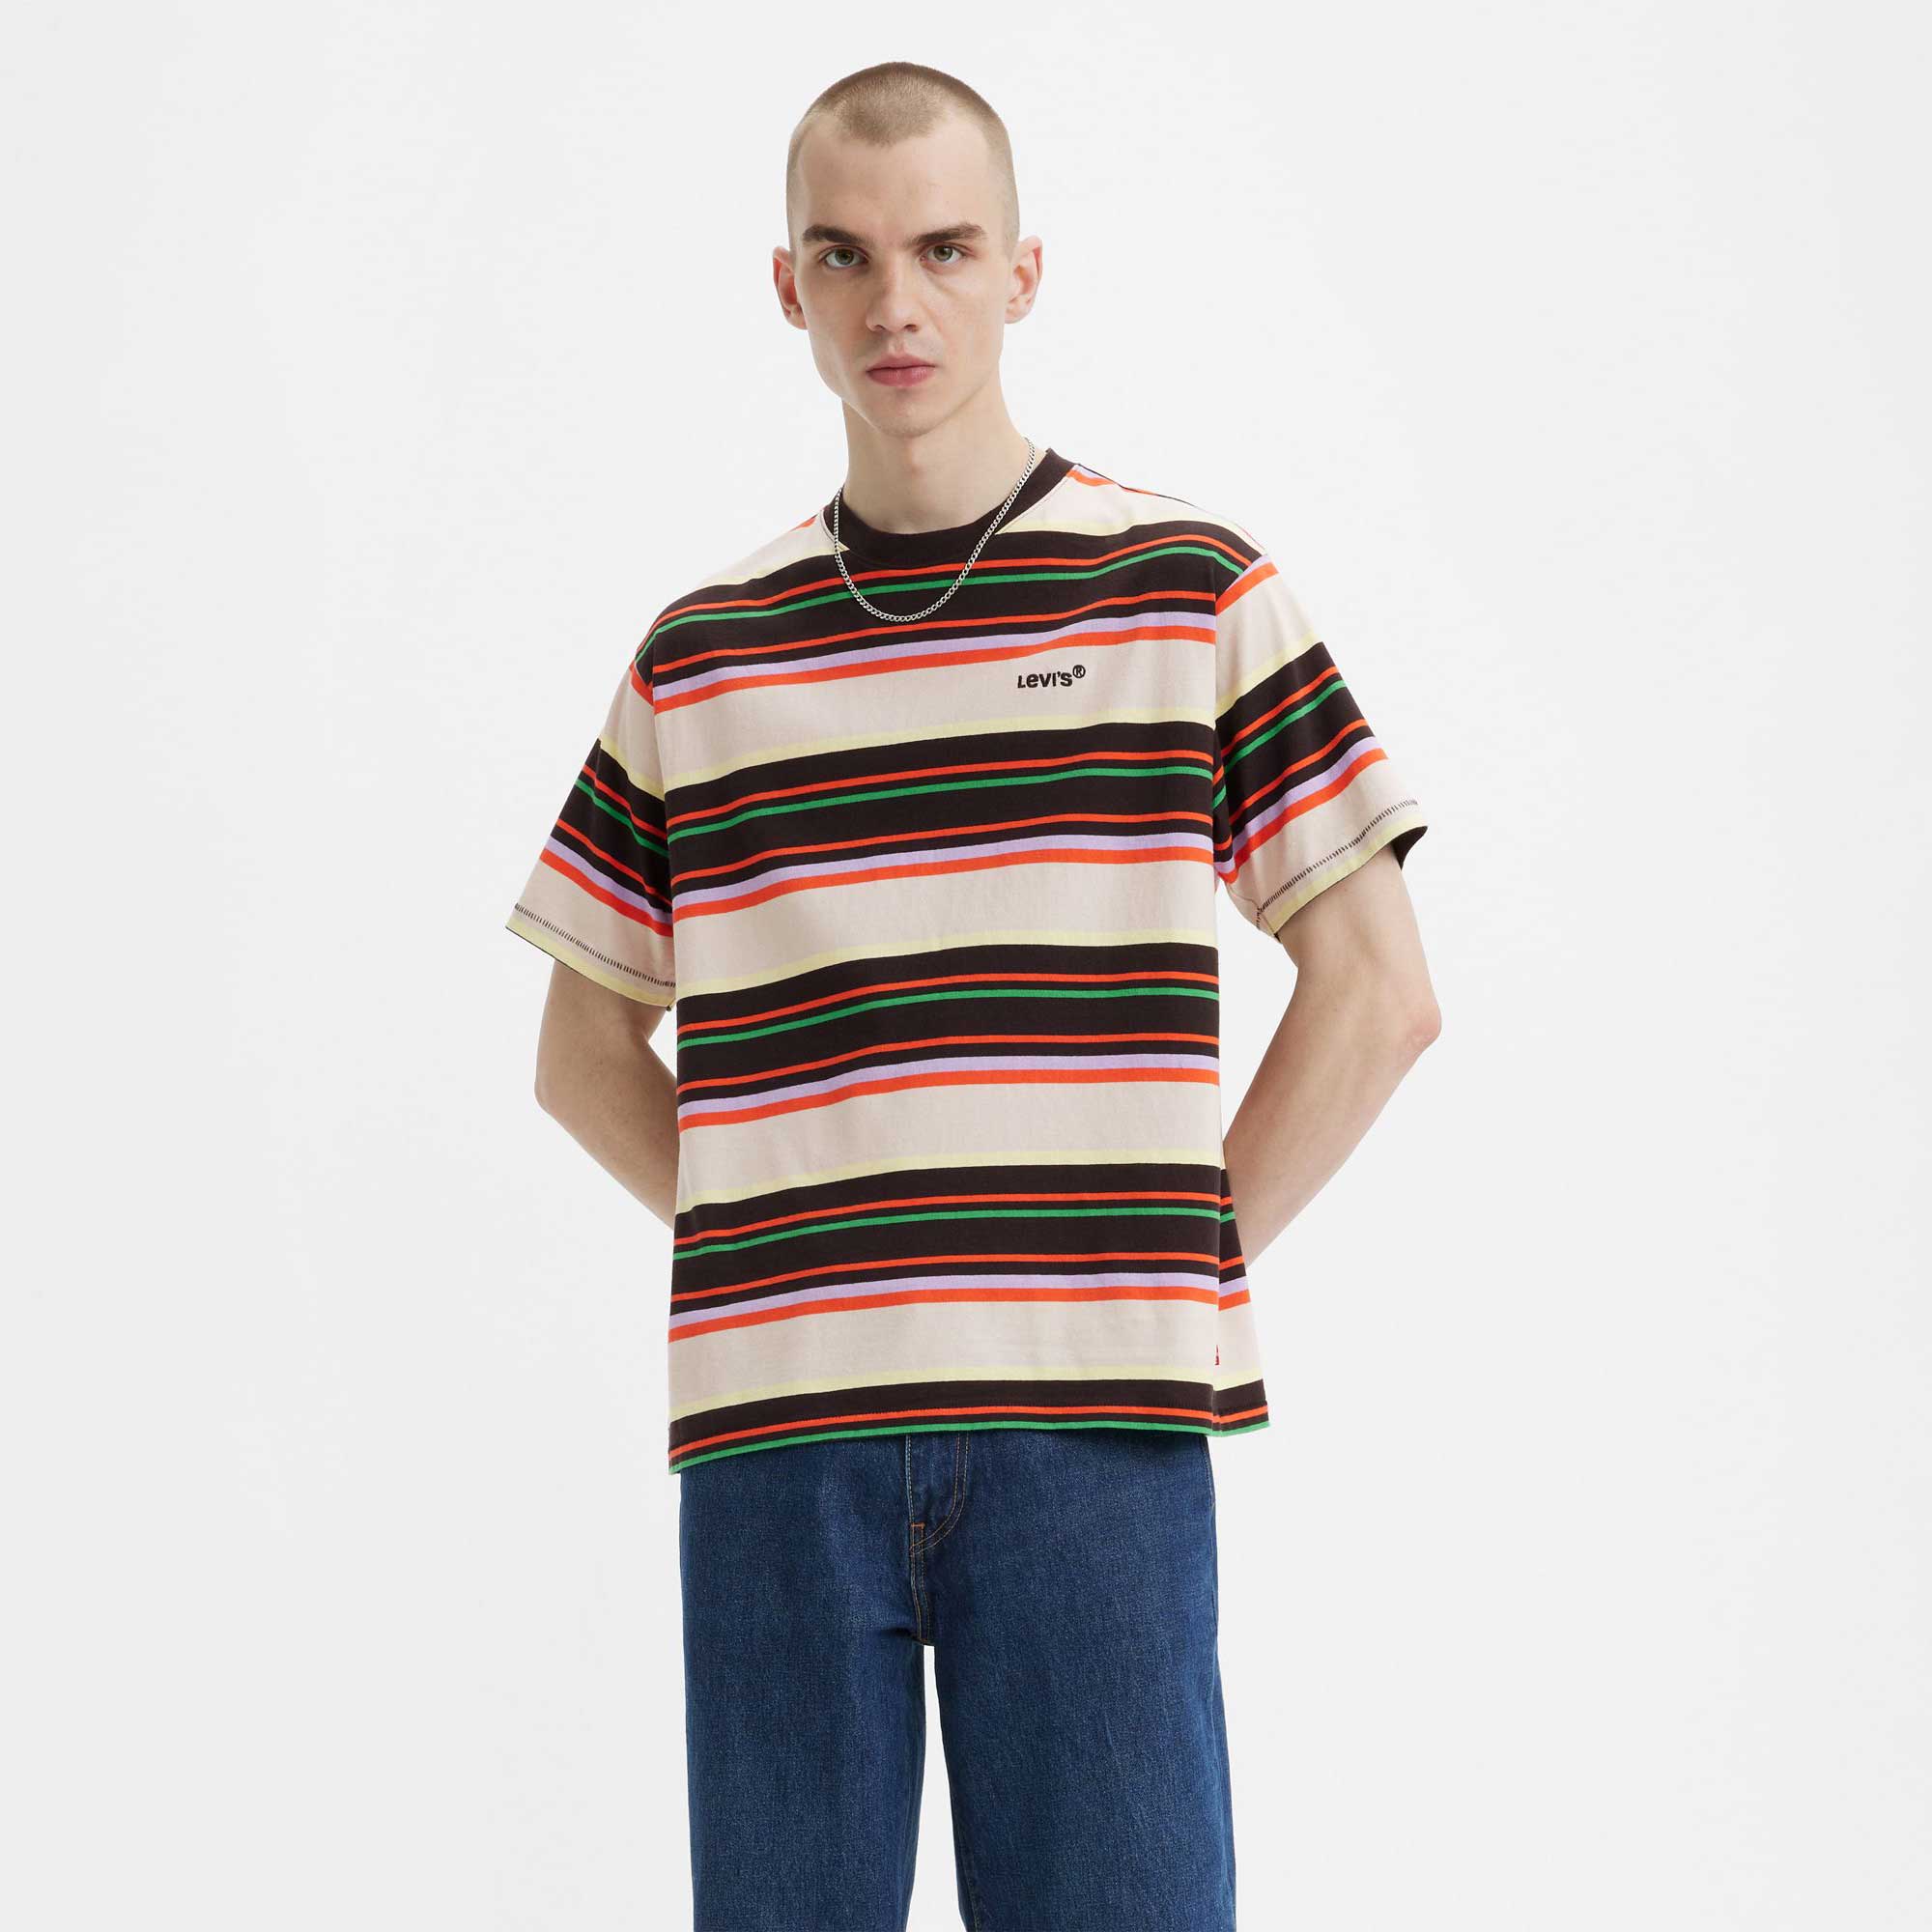 Levi's Red Tab Vintage Tee, queen stripe rainy day, A0637-0069 – Norwood